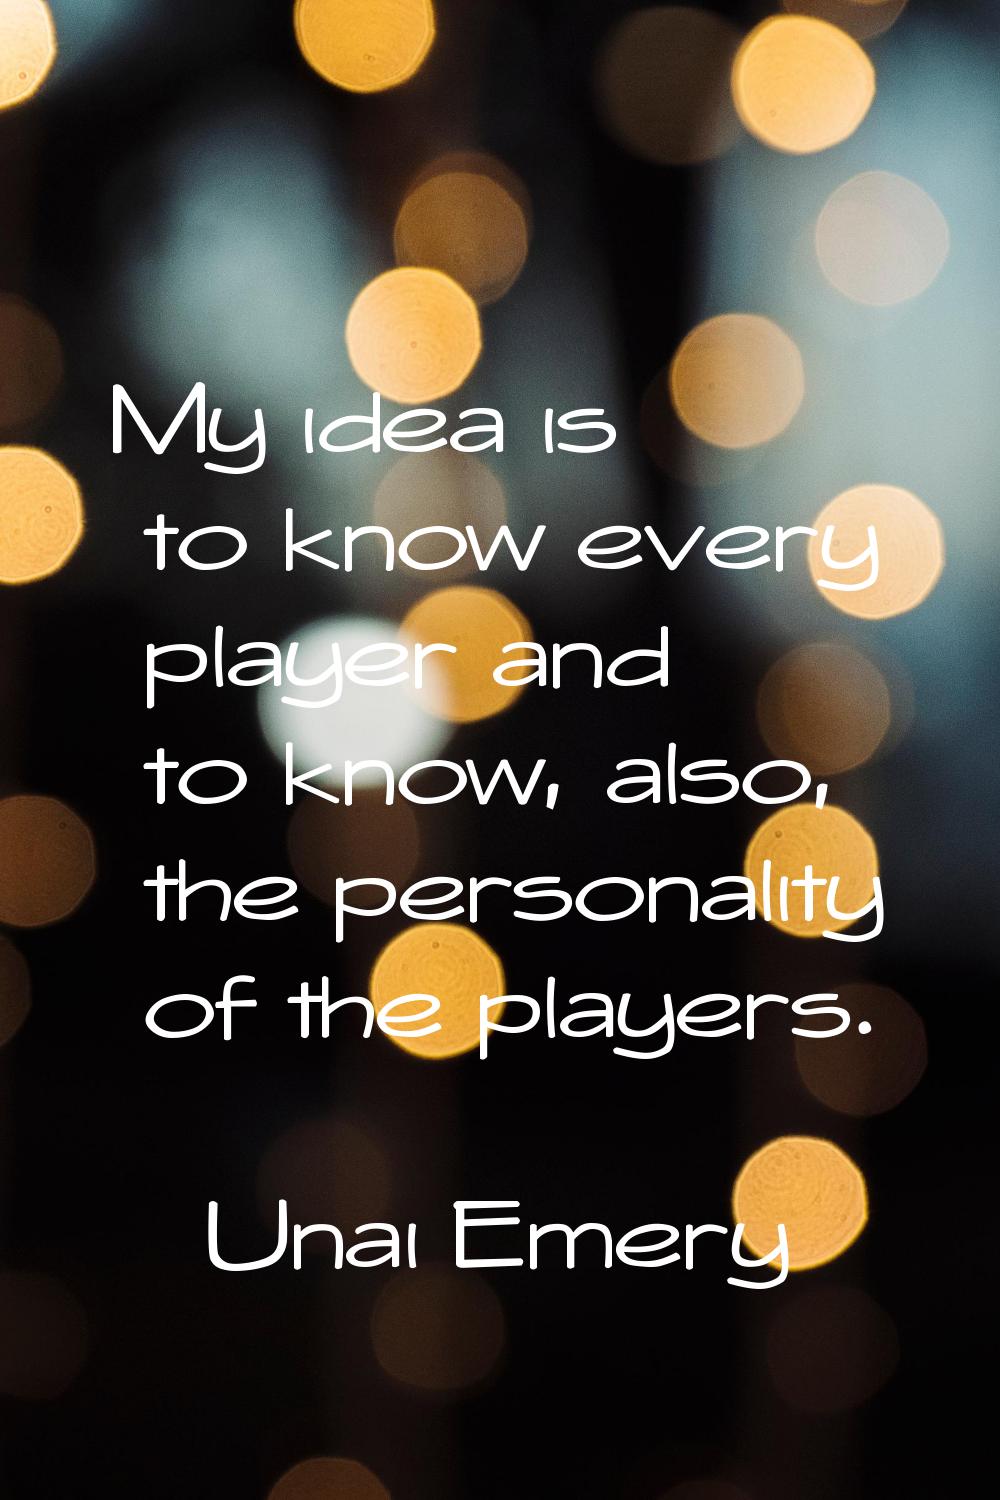 My idea is to know every player and to know, also, the personality of the players.